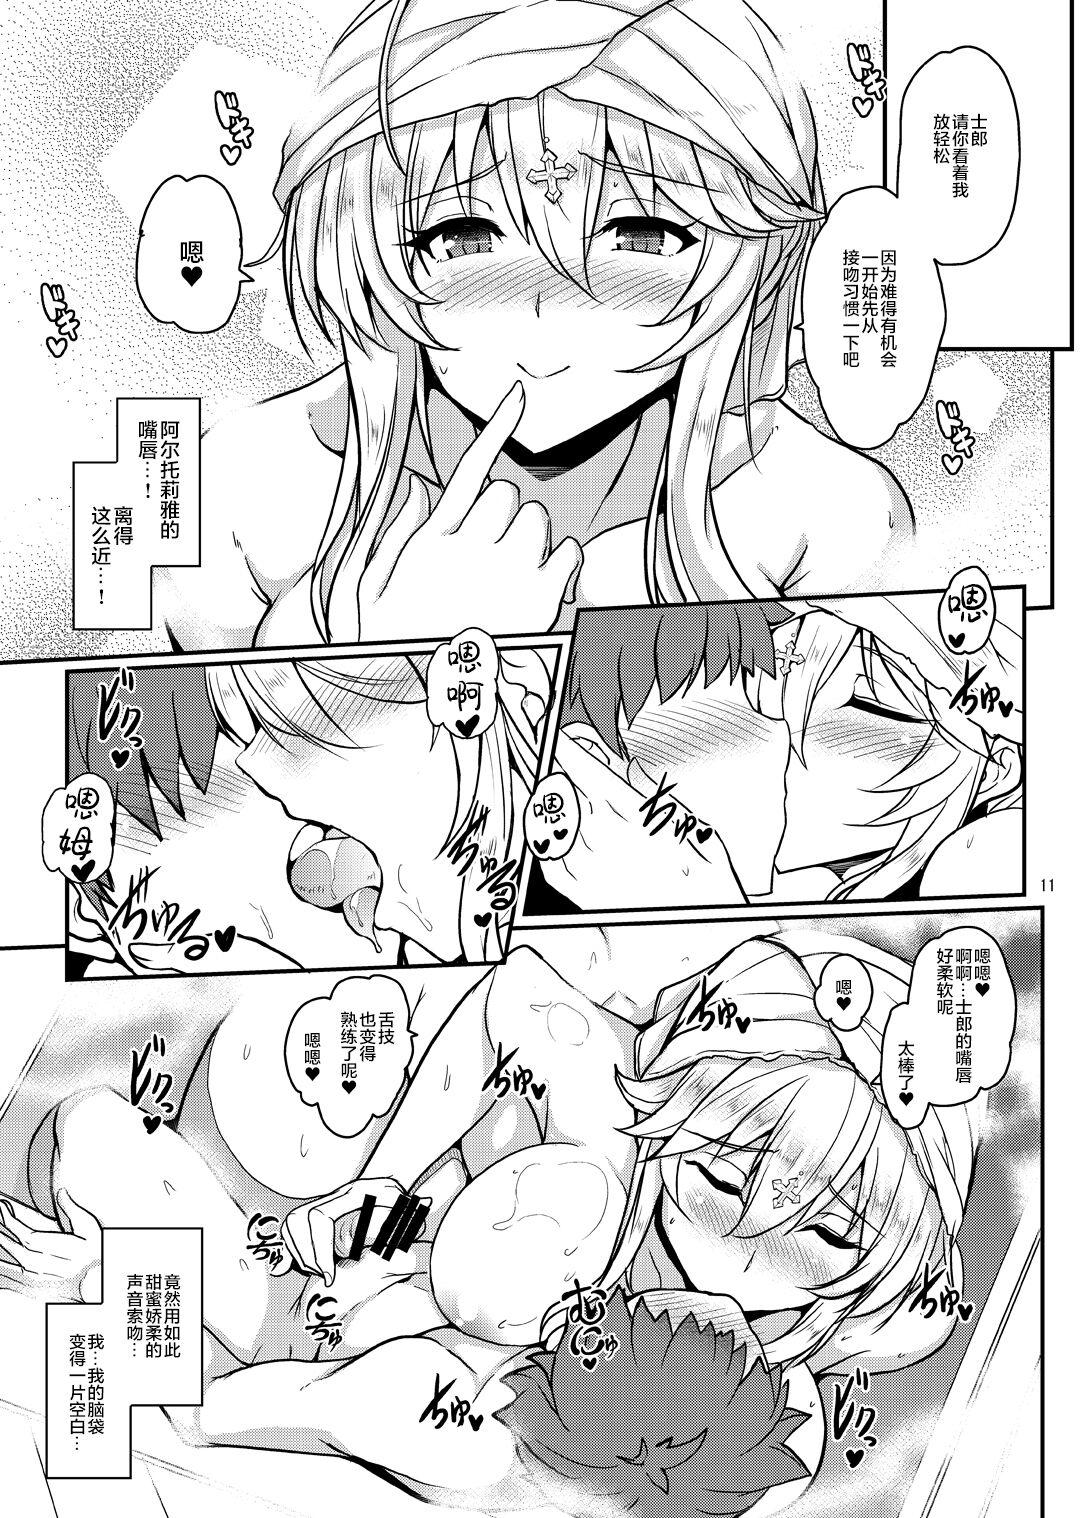 Bound となりの乳王さま六幕 - Fate grand order Reversecowgirl - Page 11